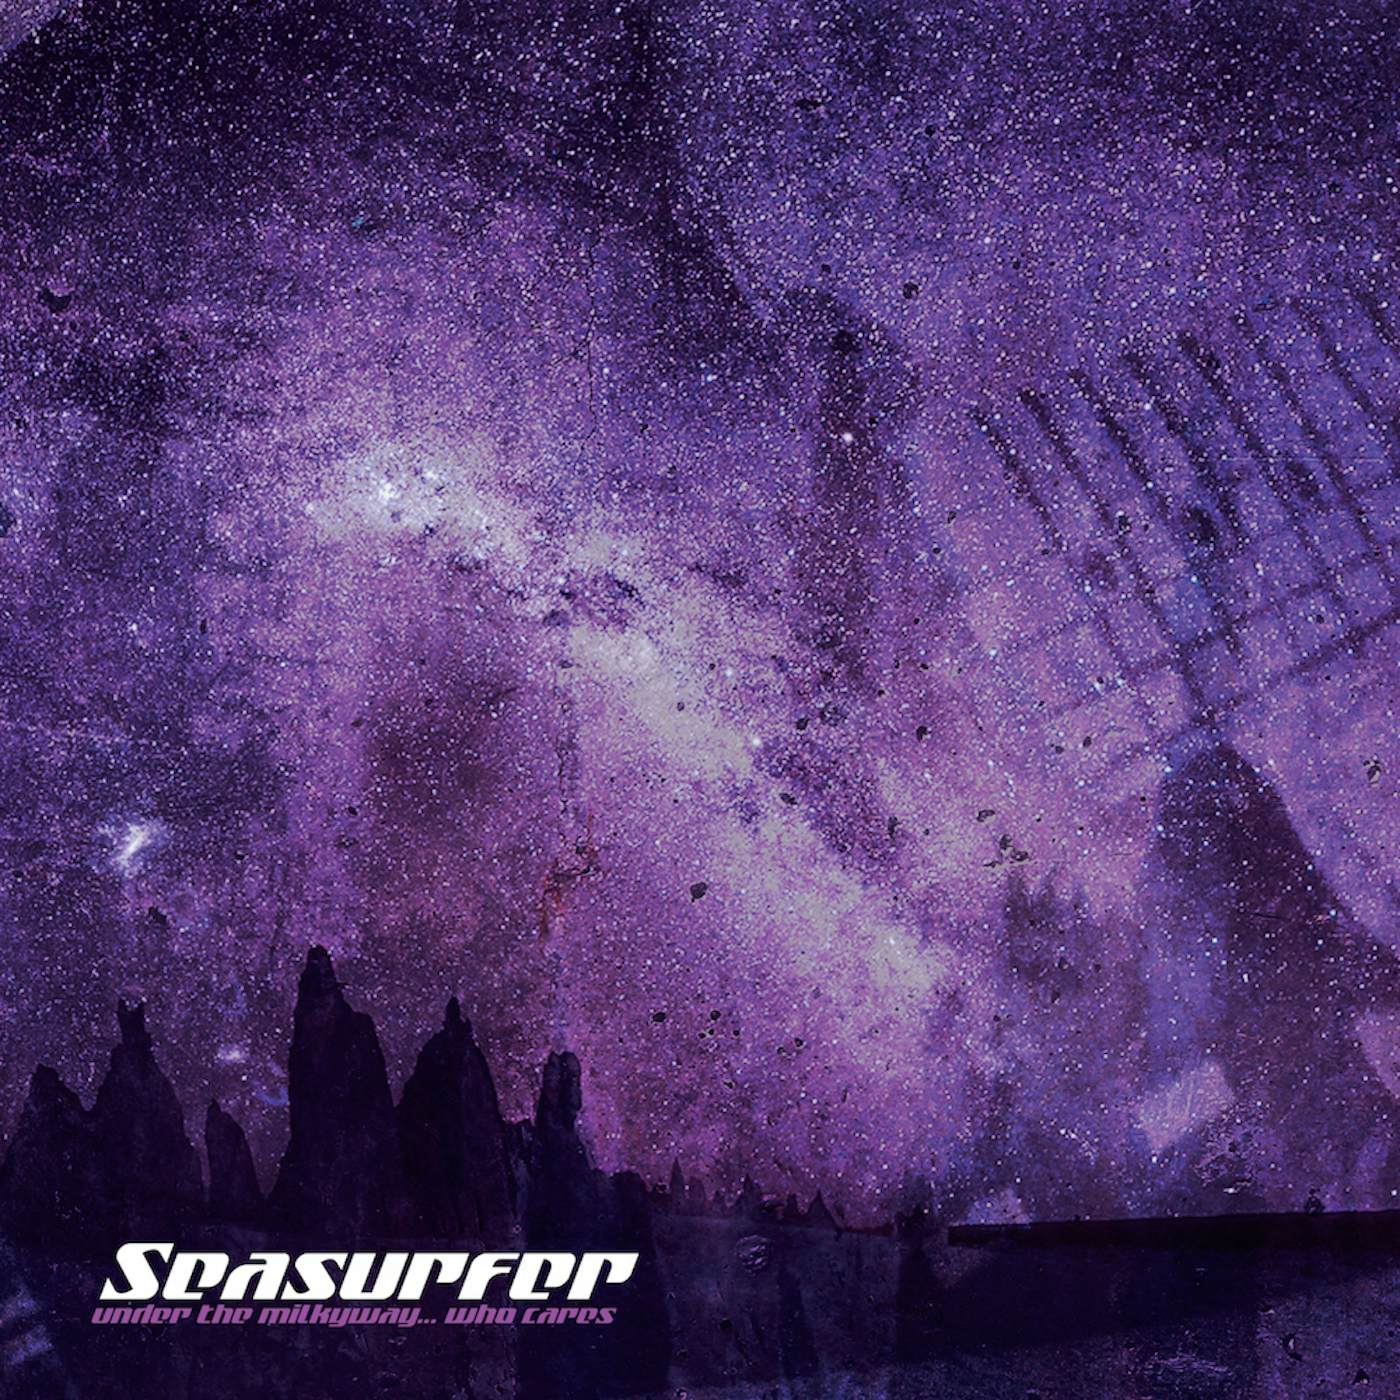 Seasurfer UNDER THE MILKYWAY WHO CARES? CD